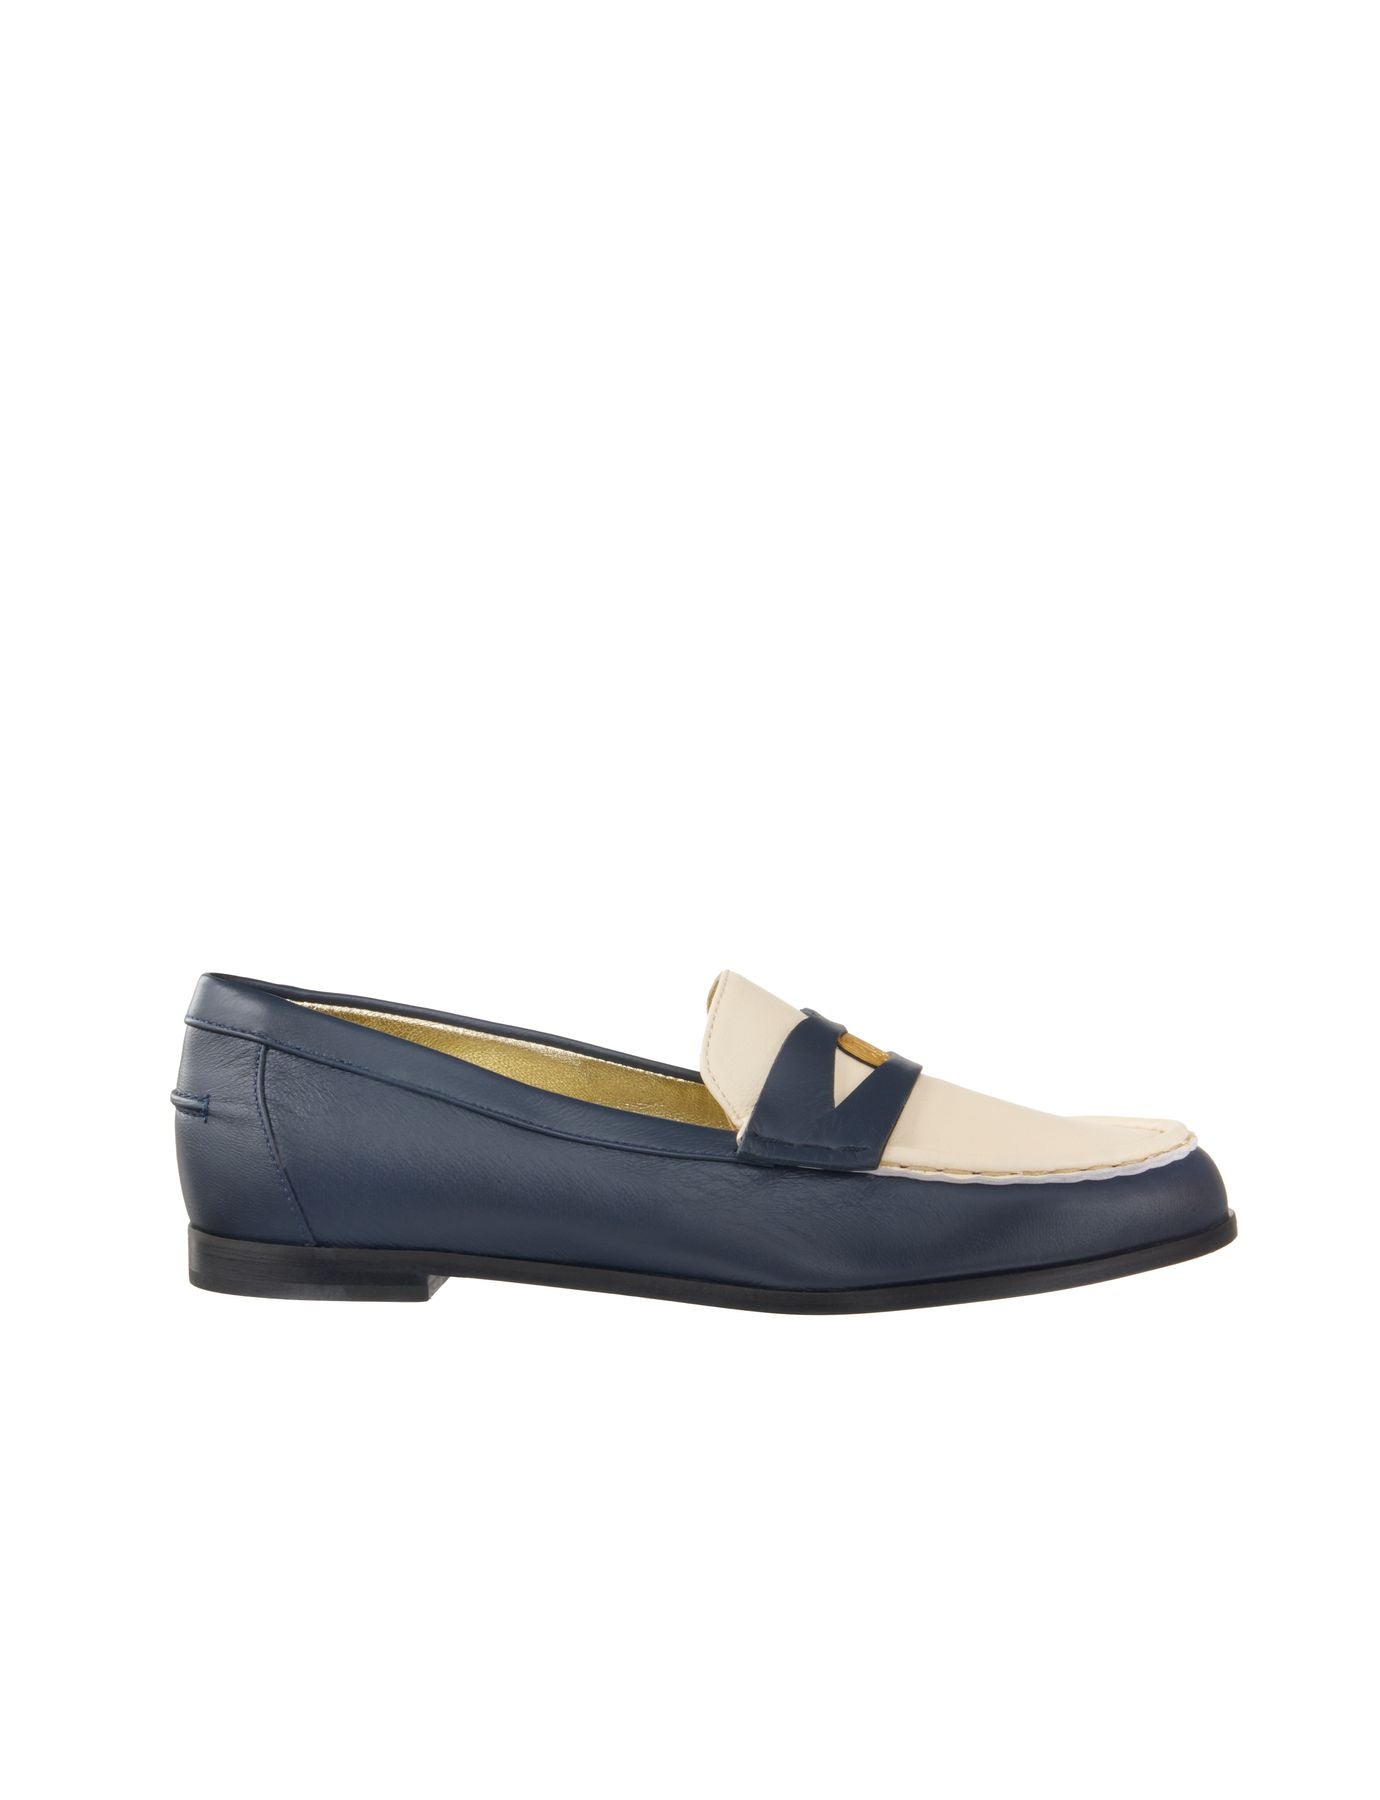 moccasin-elvire-leather-navy-and-beige